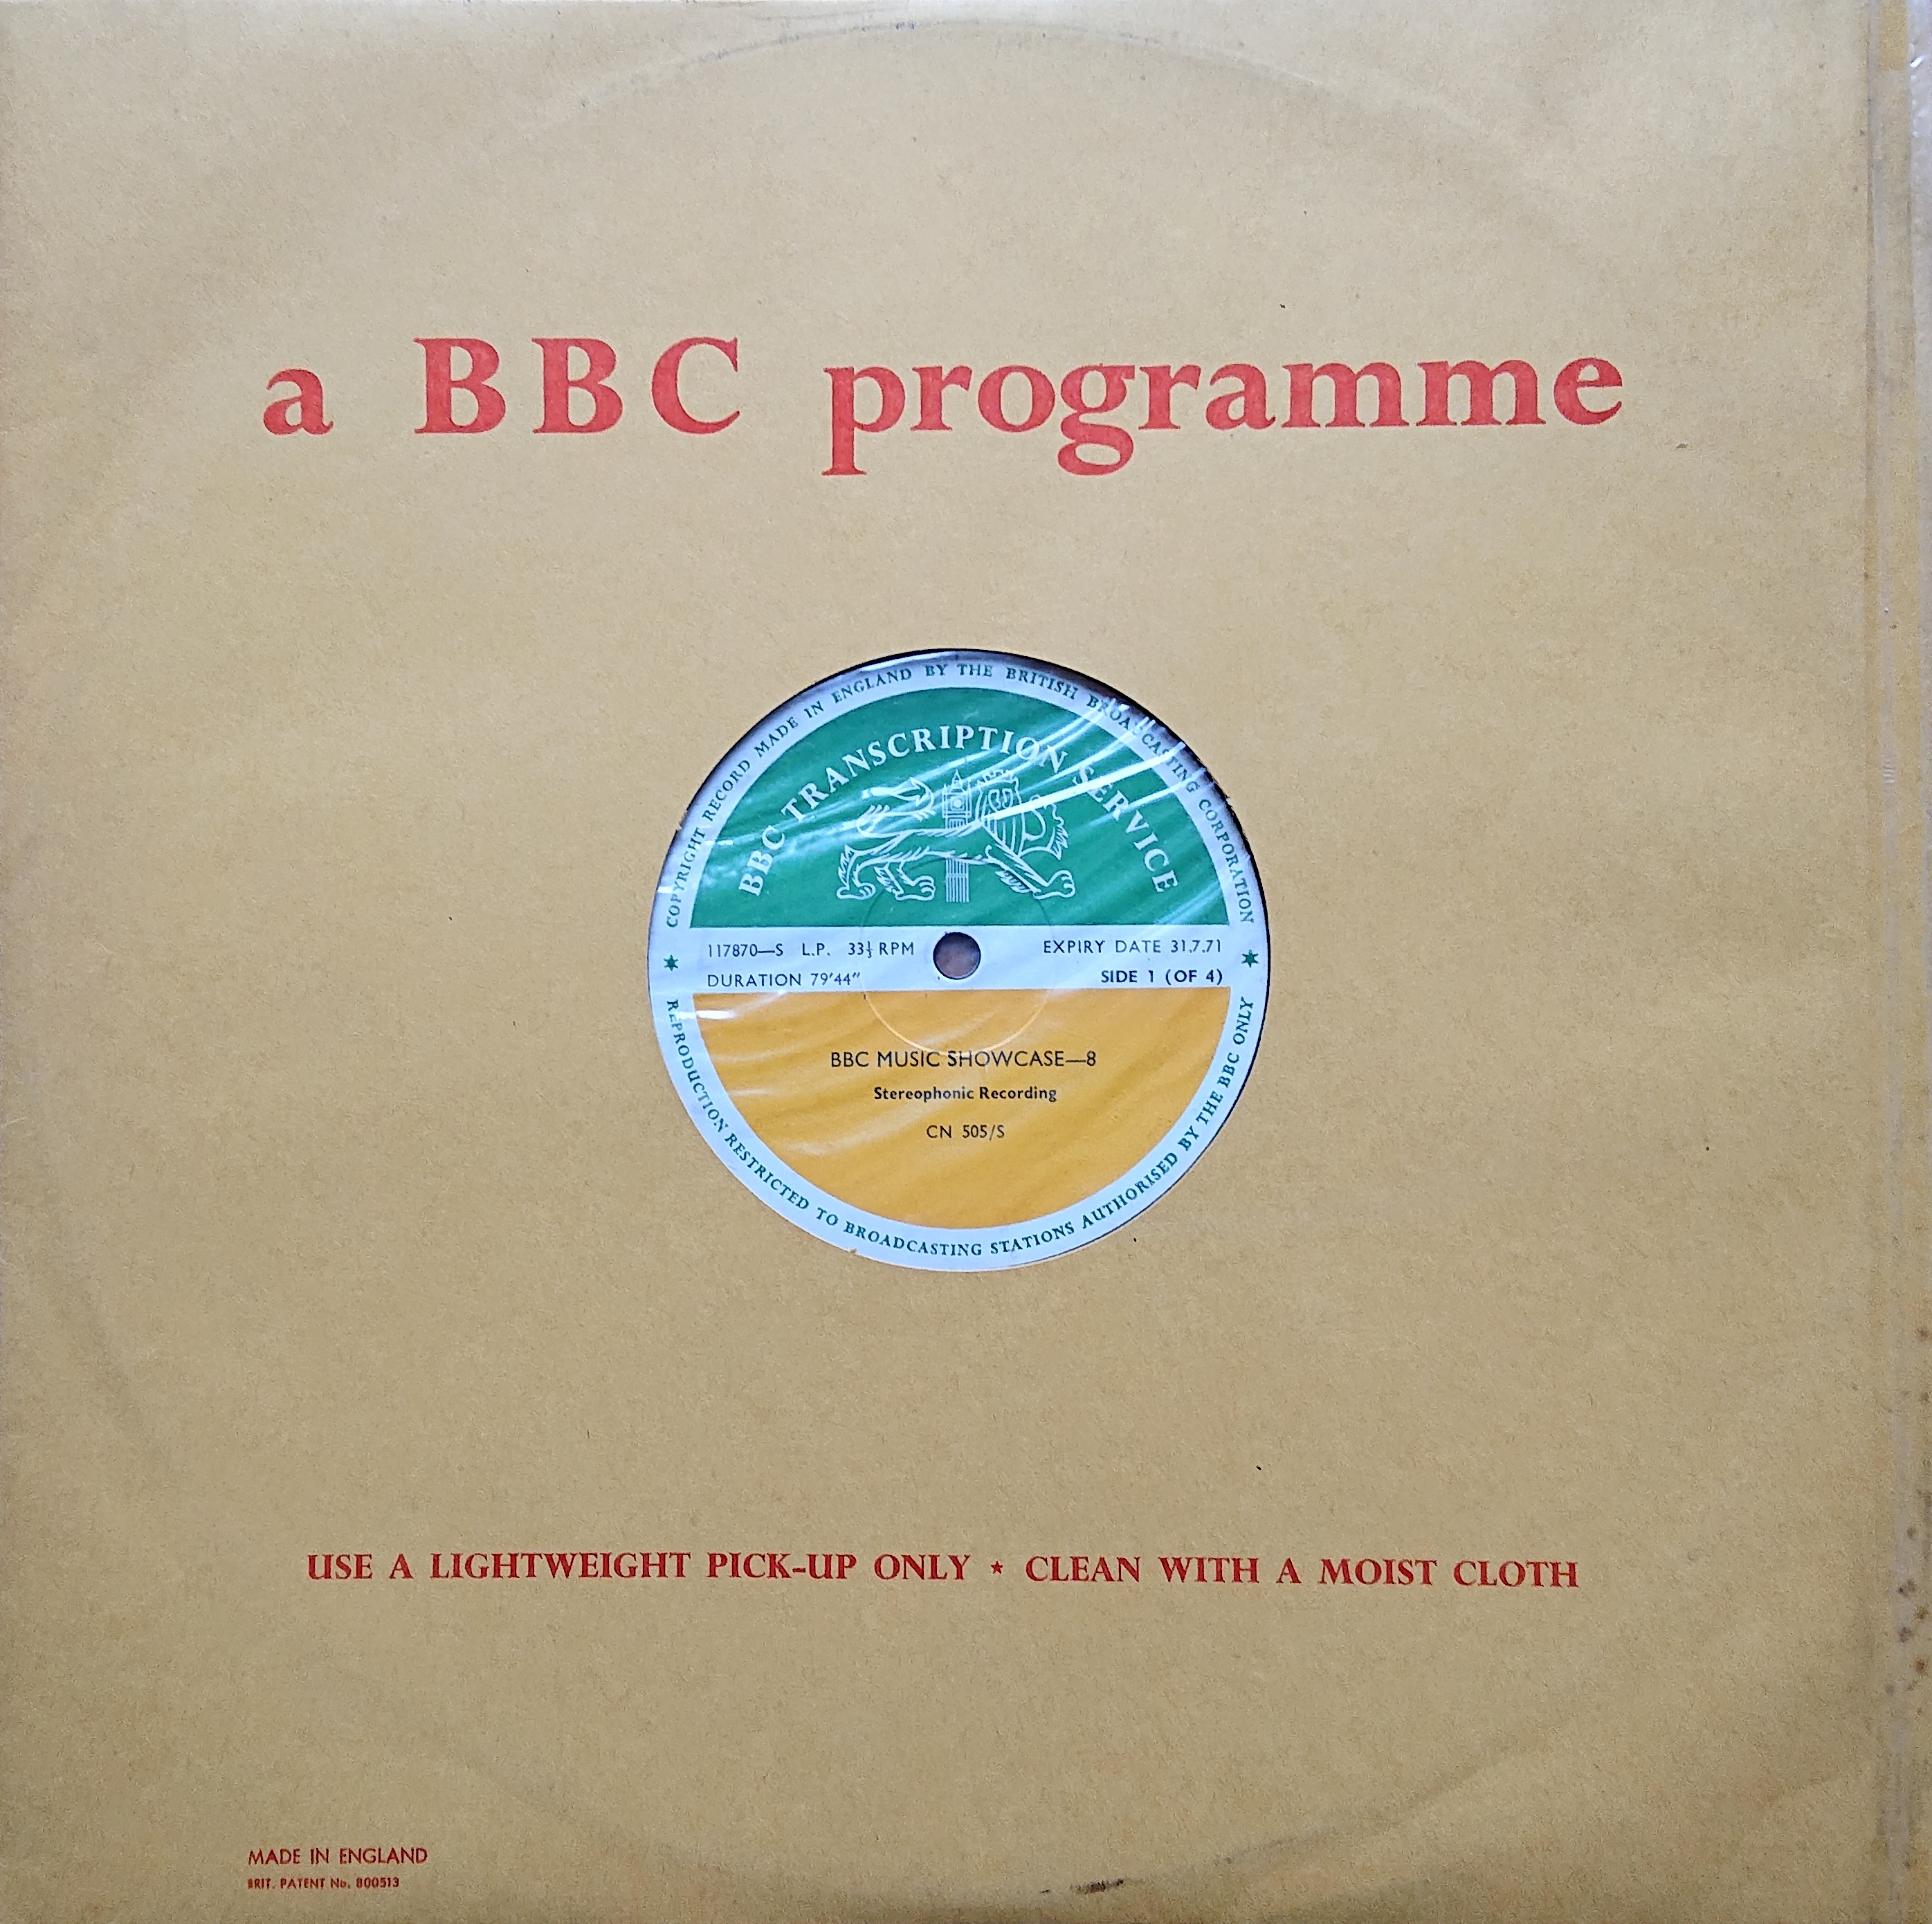 Picture of CN 505 S 15 BBC music showcase - 8 (Sides 1 & 3) by artist Various from the BBC records and Tapes library